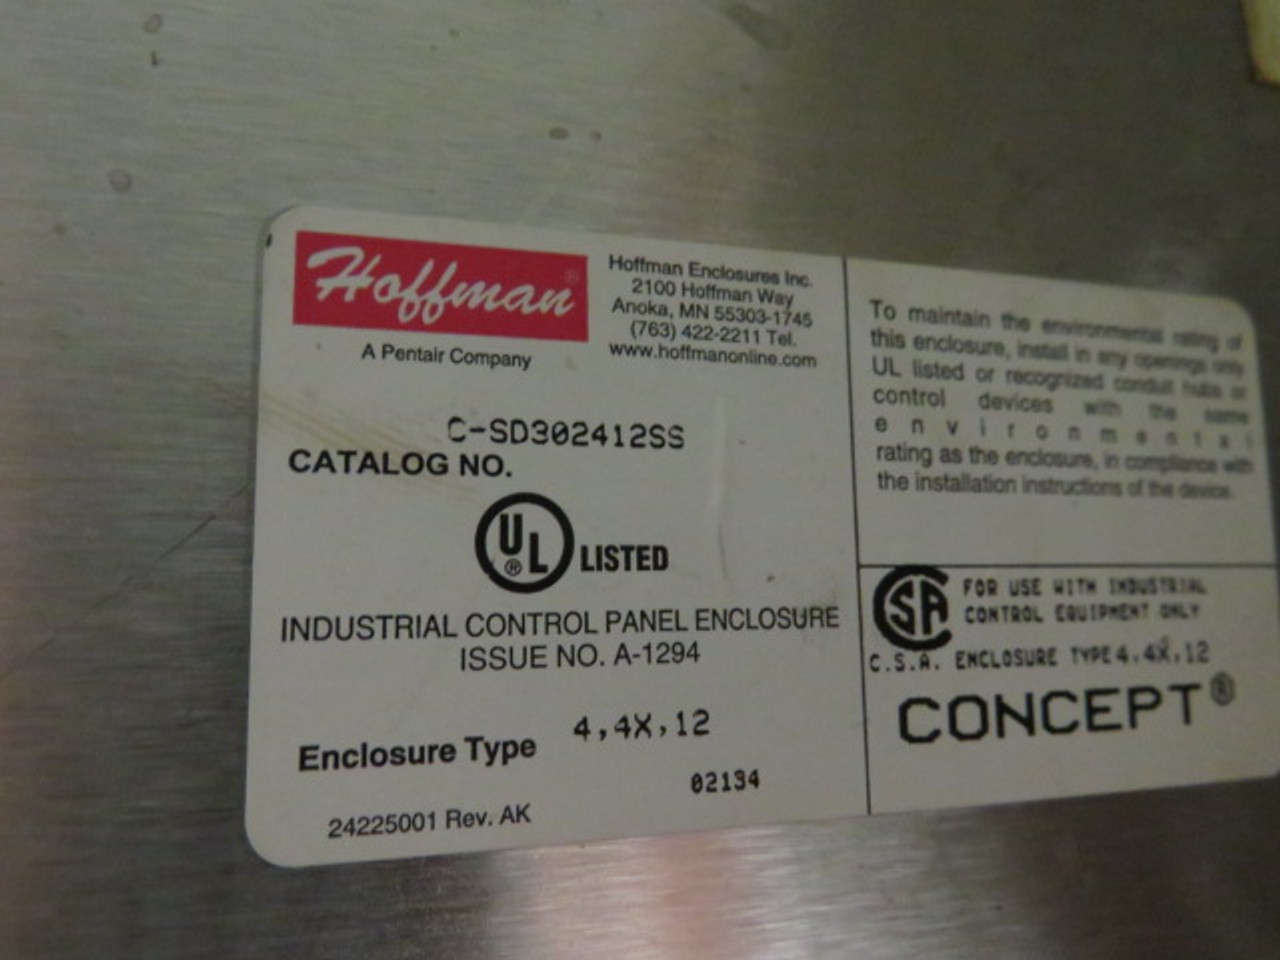 Hoffman C-SD302412SS Stainless Steel Enclosure Box 30"Lx20"Wx12"H USED